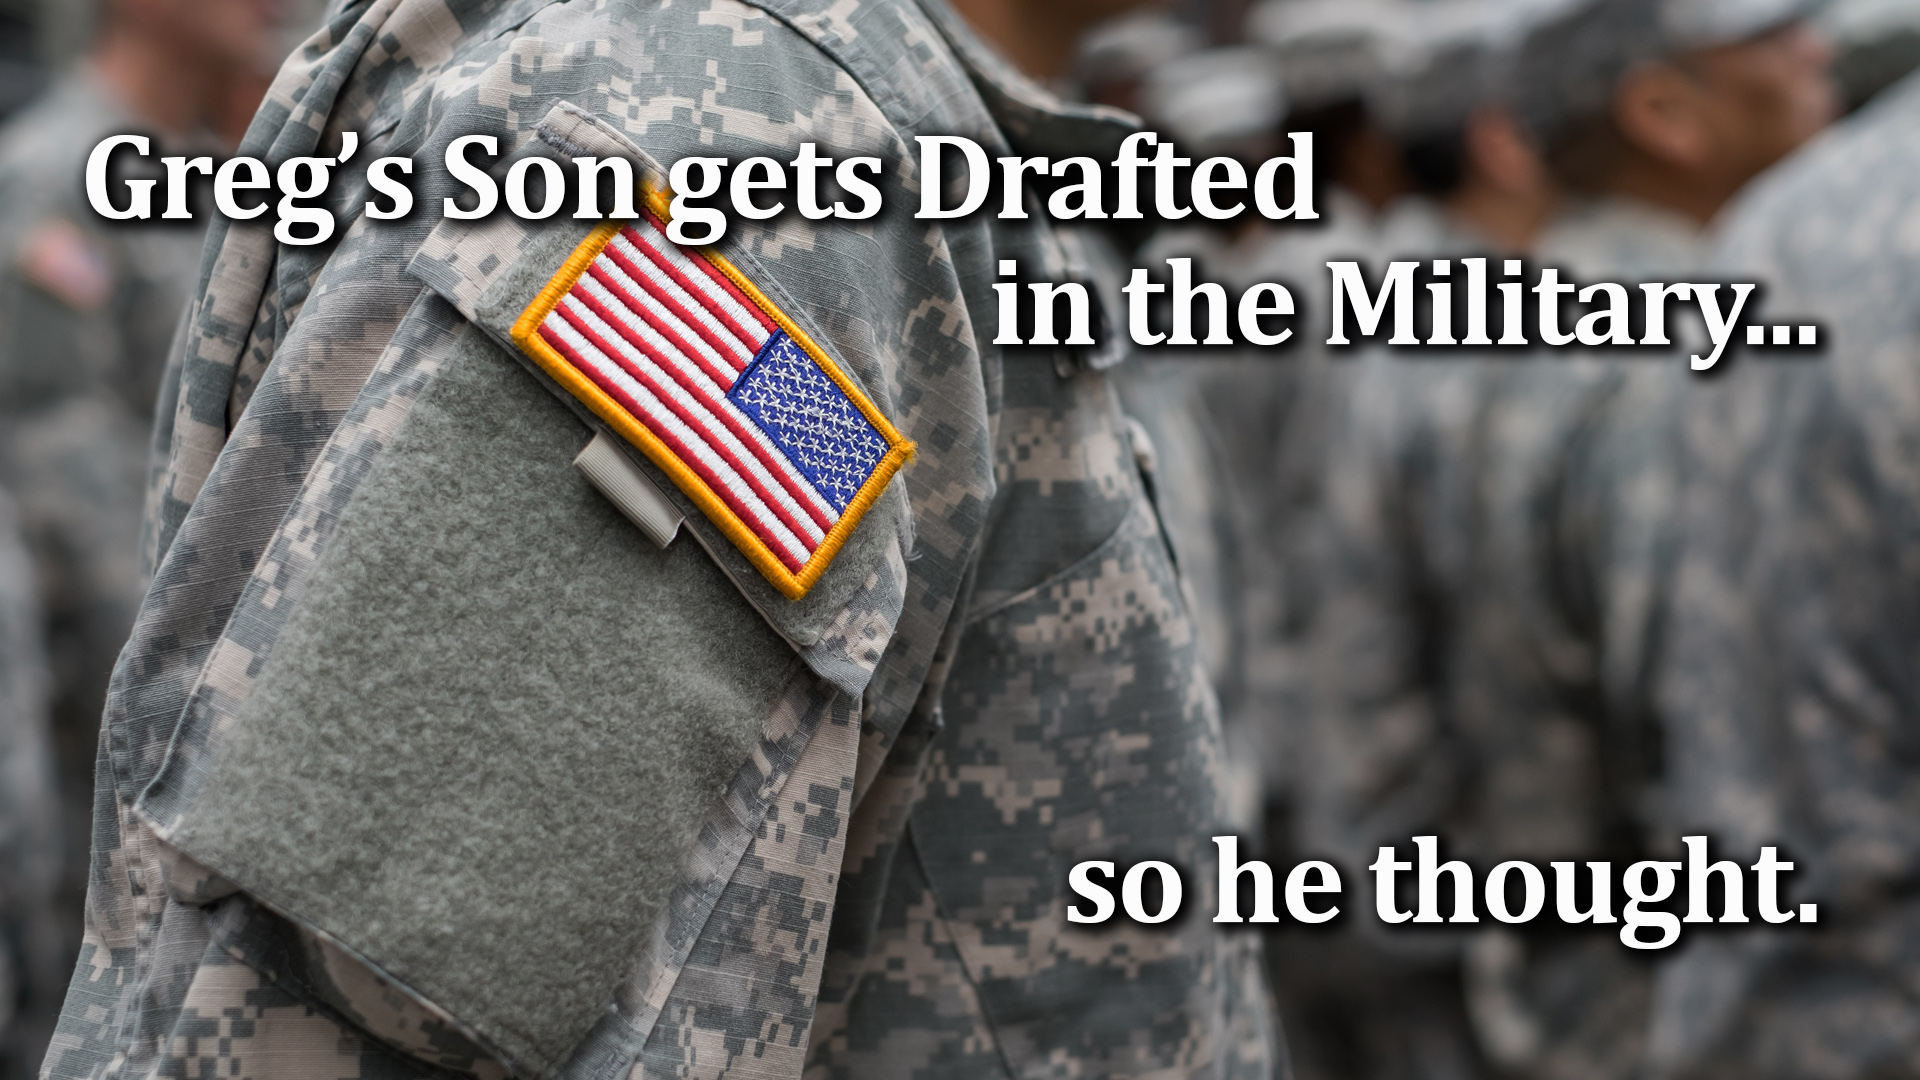 02-15-22 Gregs son gets drafted in the military he thought